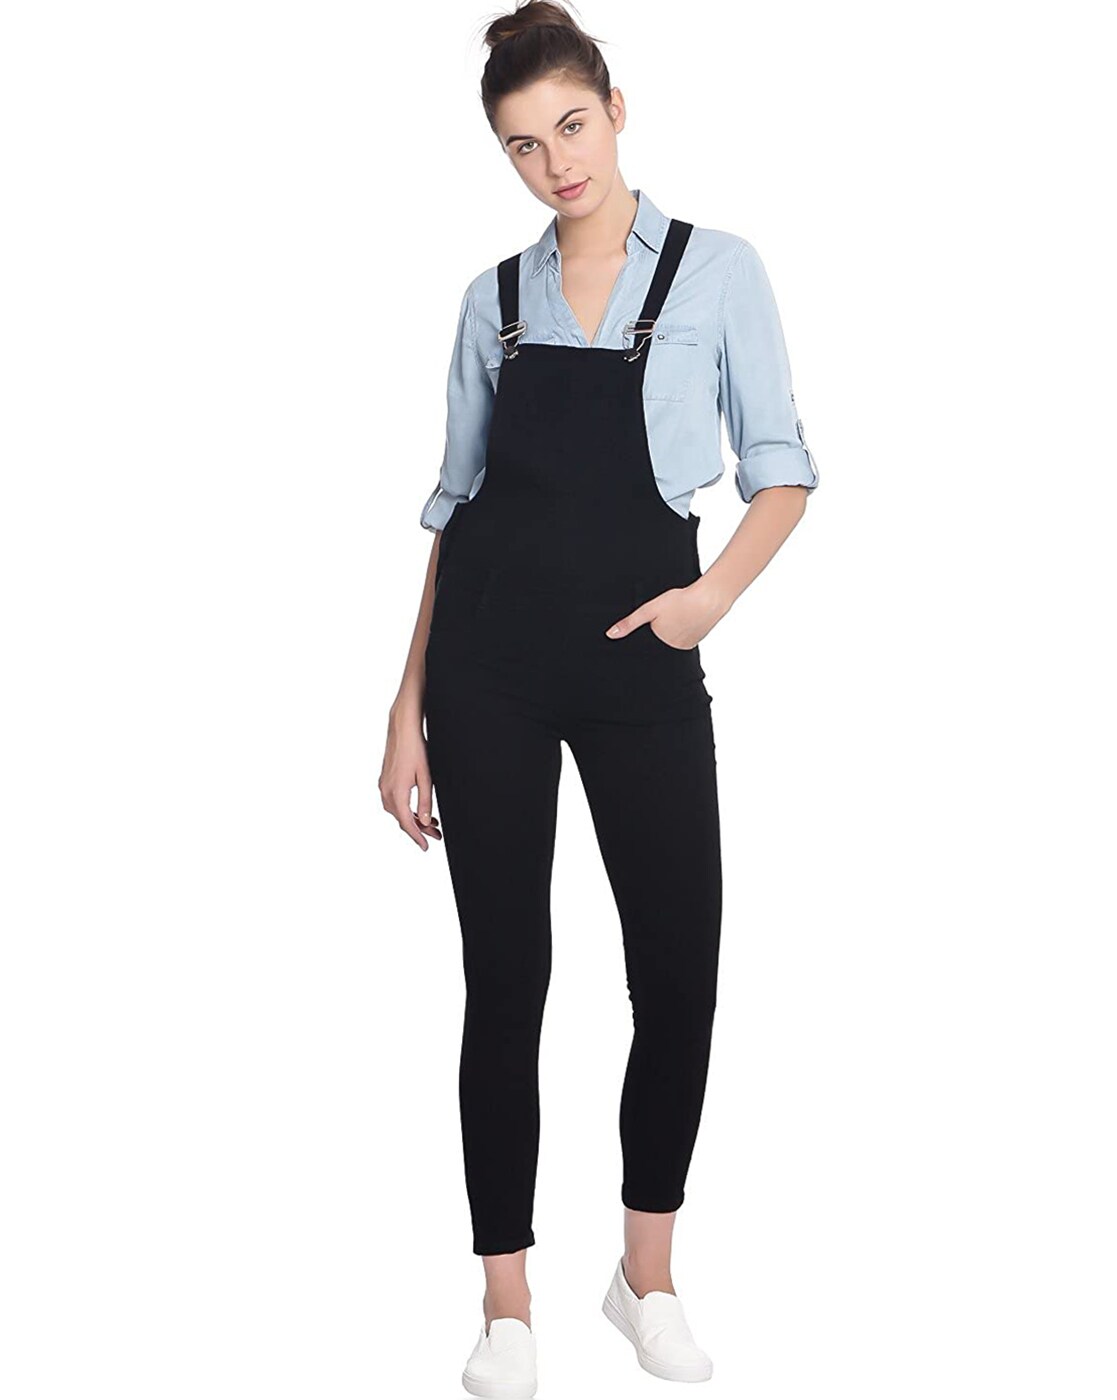 Buy Broadstar Women's Maxi Dungaree (1350_Blue_28_Blue_28) at Amazon.in